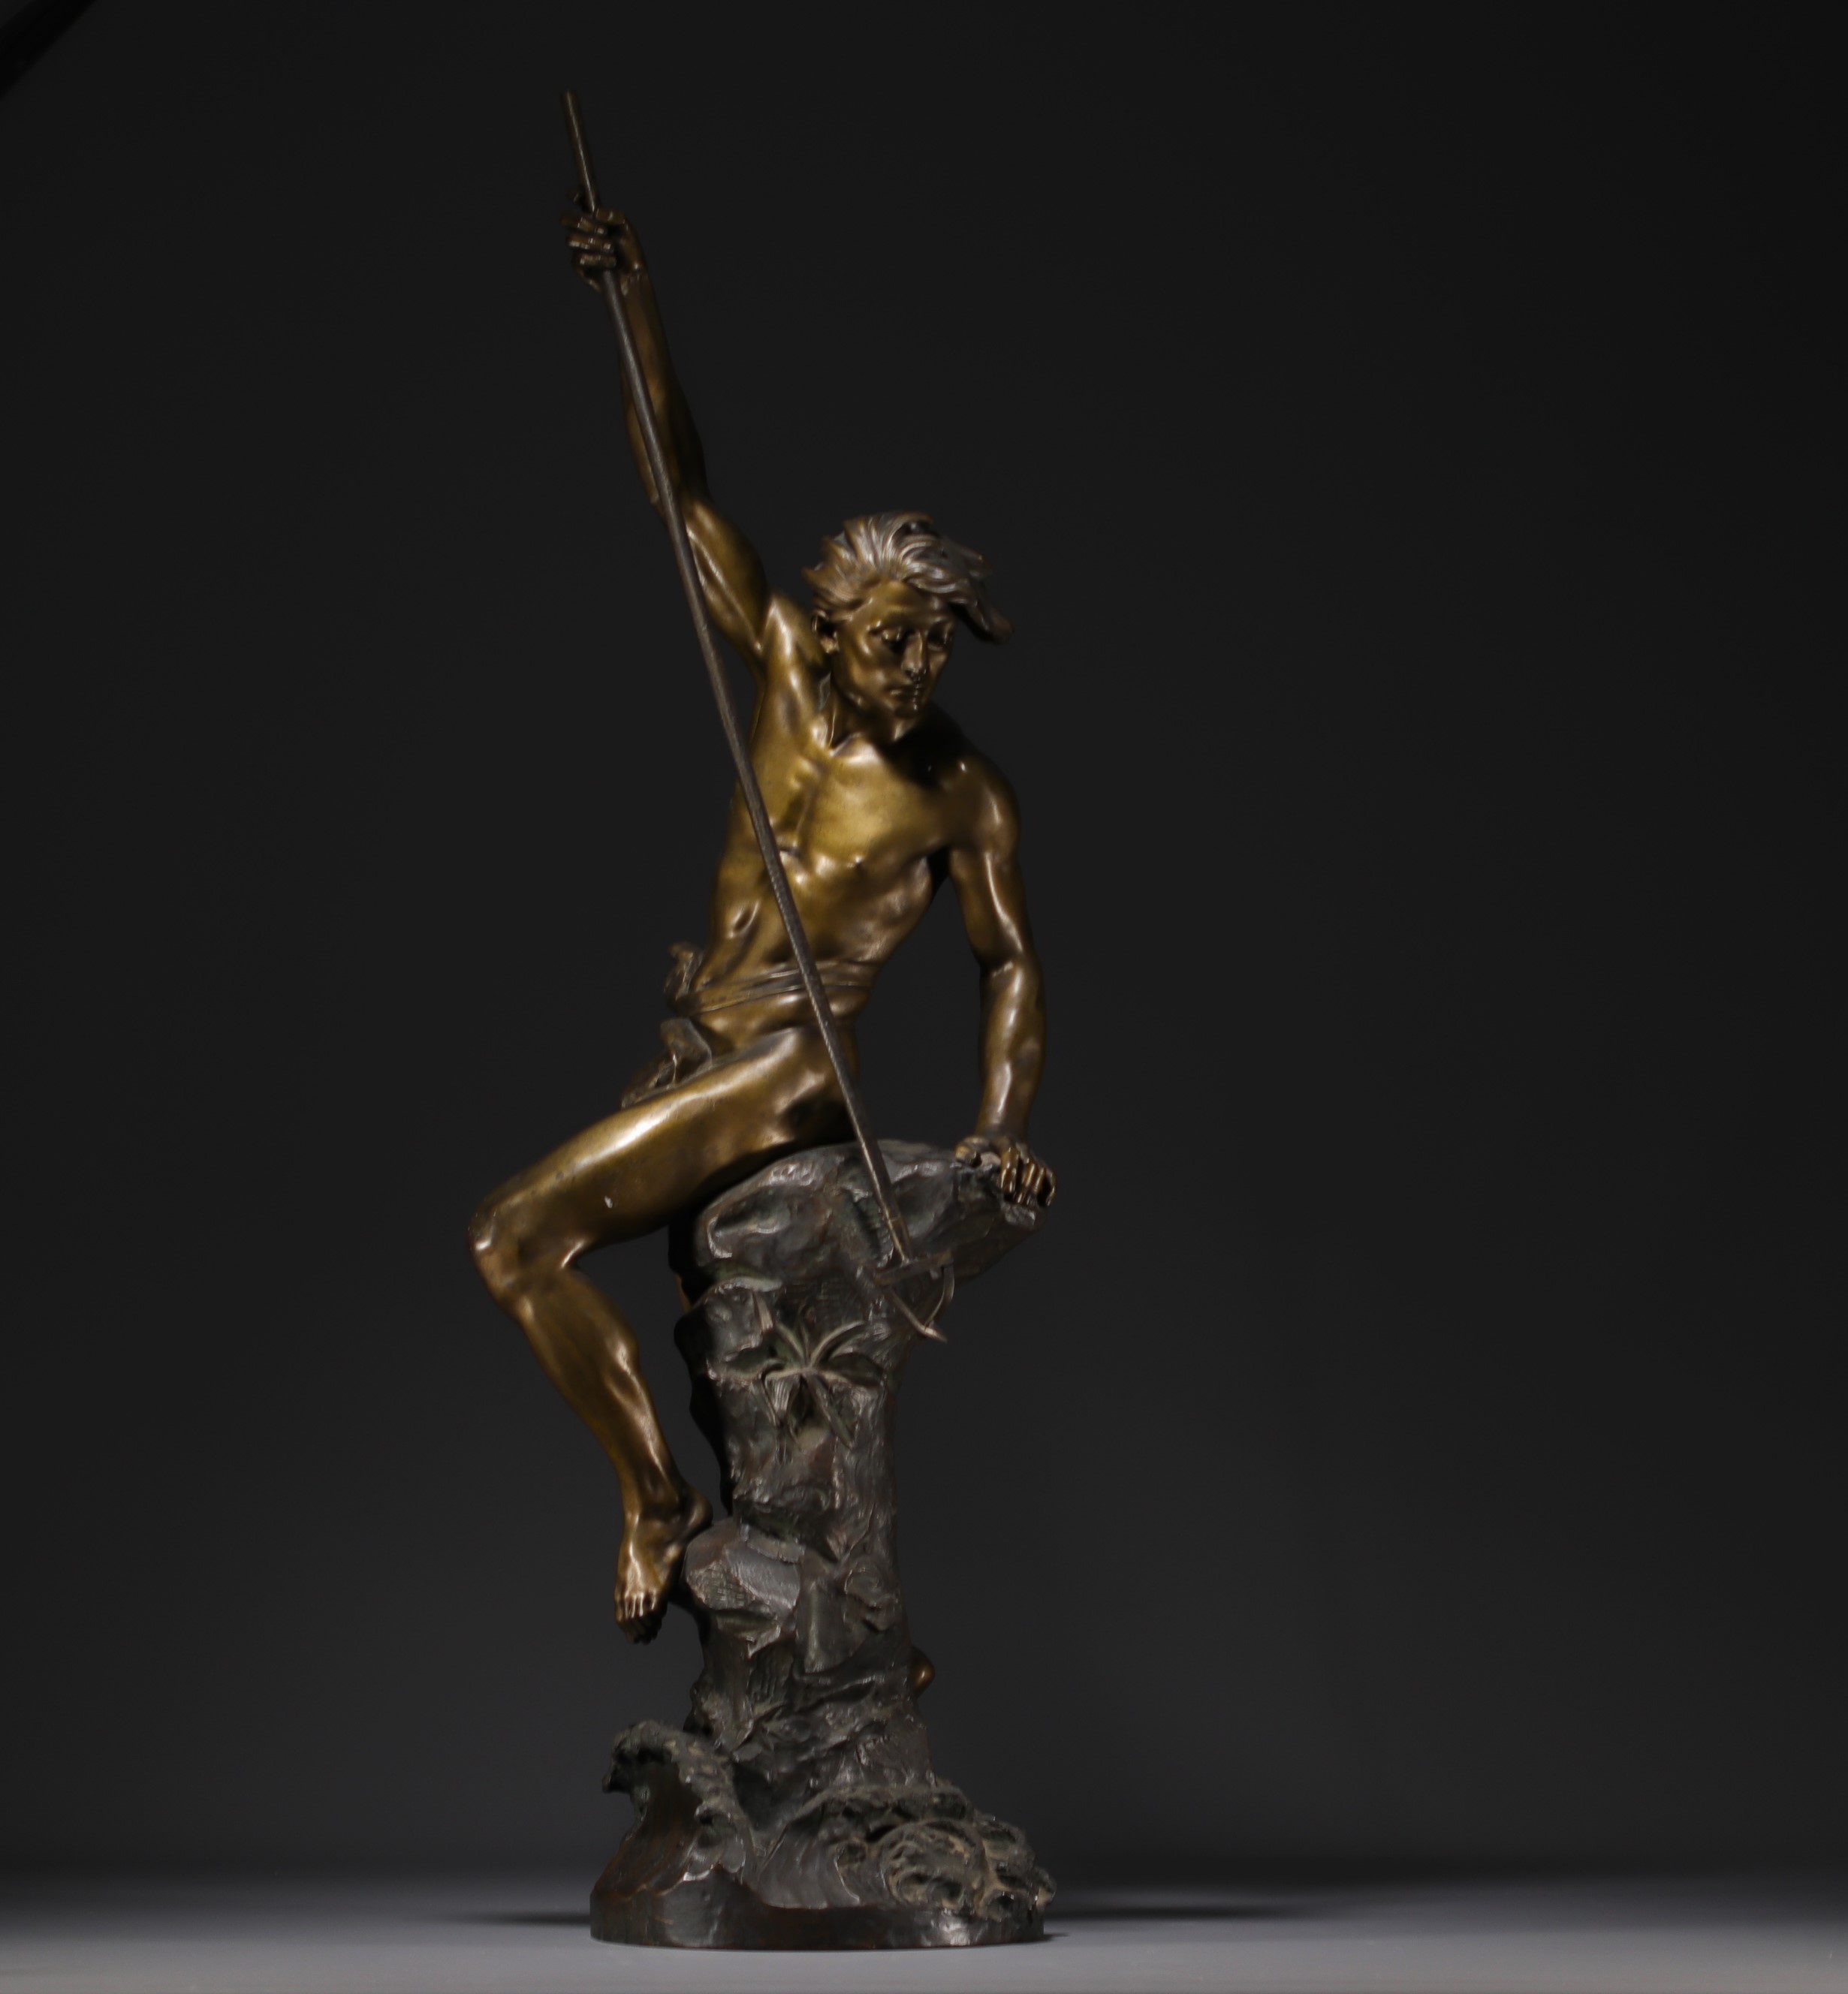 Ernest Justin FERRAND (1846-1932) "The young sinner" Sculpture in chased and patinated bronze. - Image 6 of 7